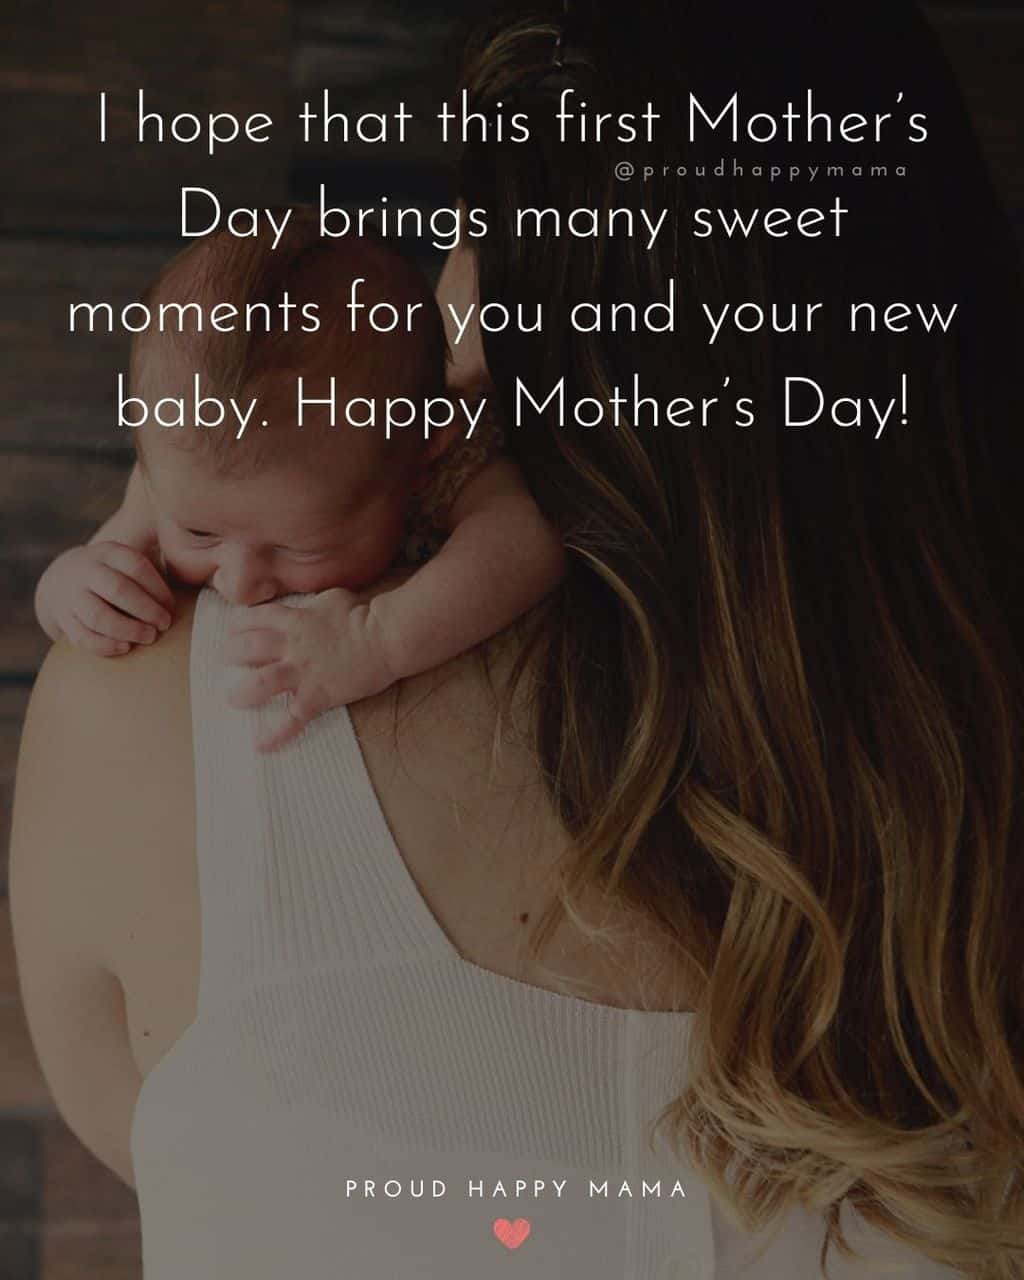 First Mothers Day Quotes - I hope that this first Mother’s Day brings many sweet moments for you and your new baby. Happy Mother’s